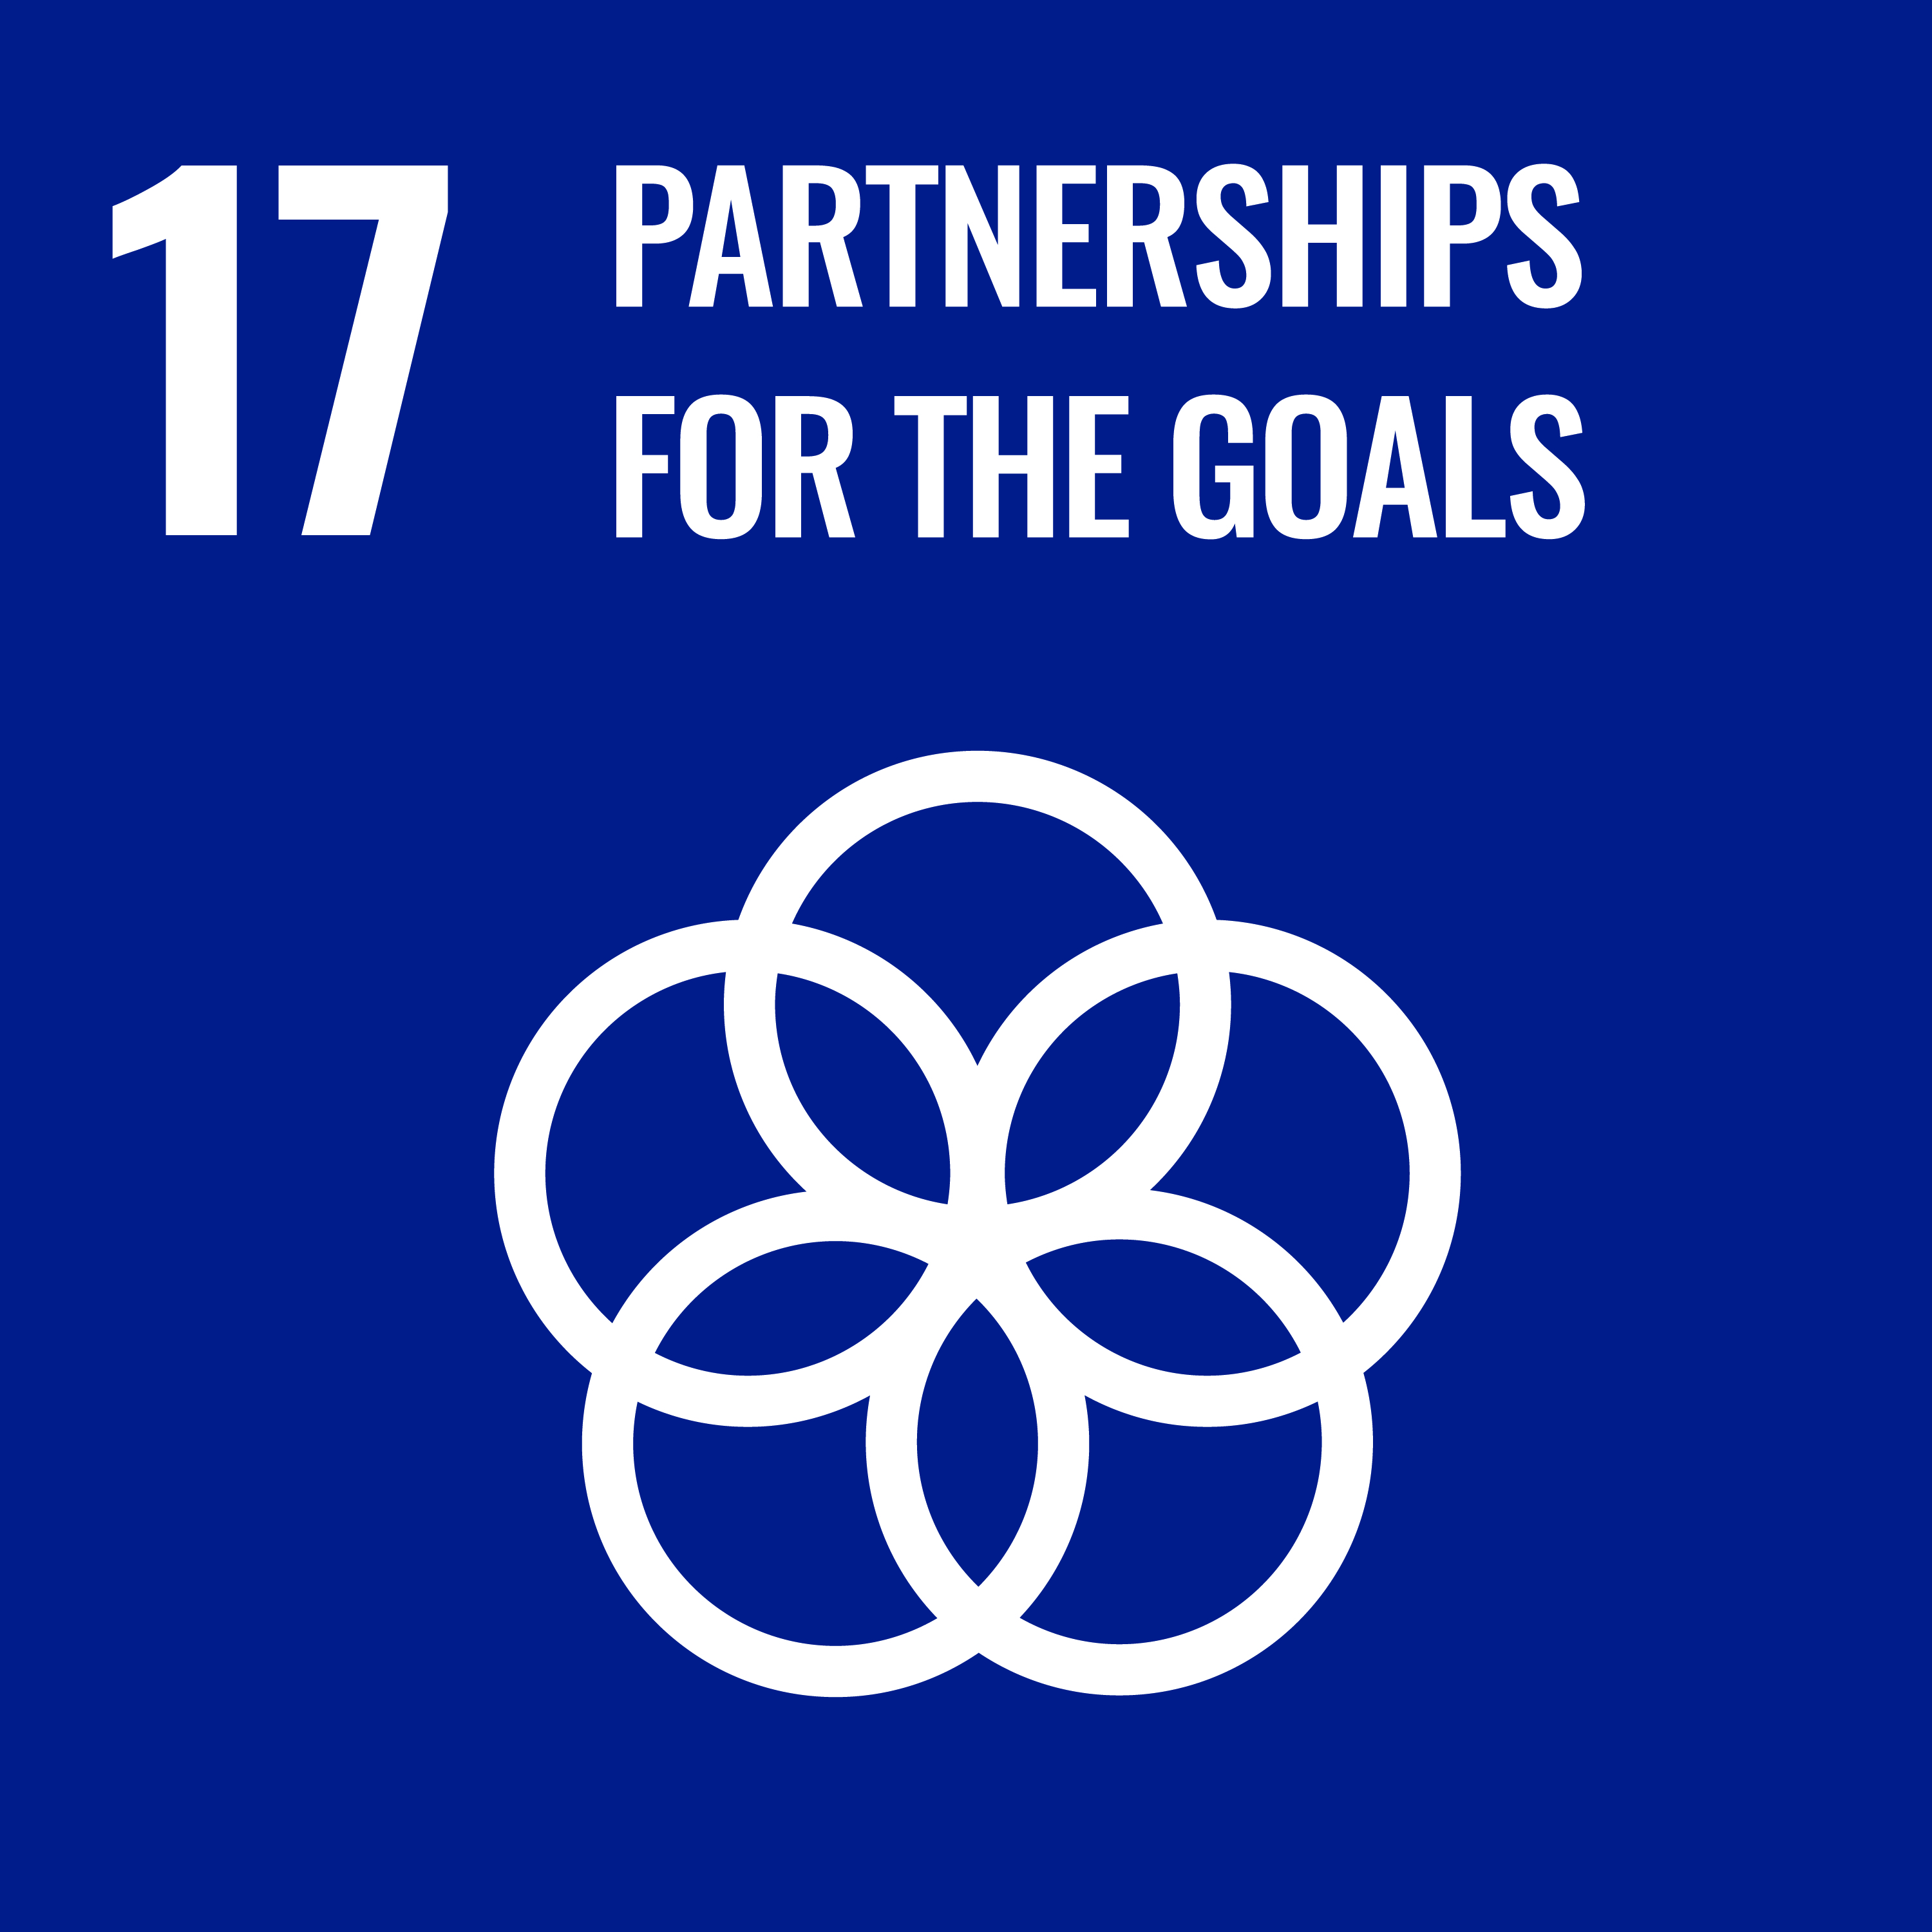 A blue graphic depicting interwoven circles and the text "17: Partnerships for the goals"